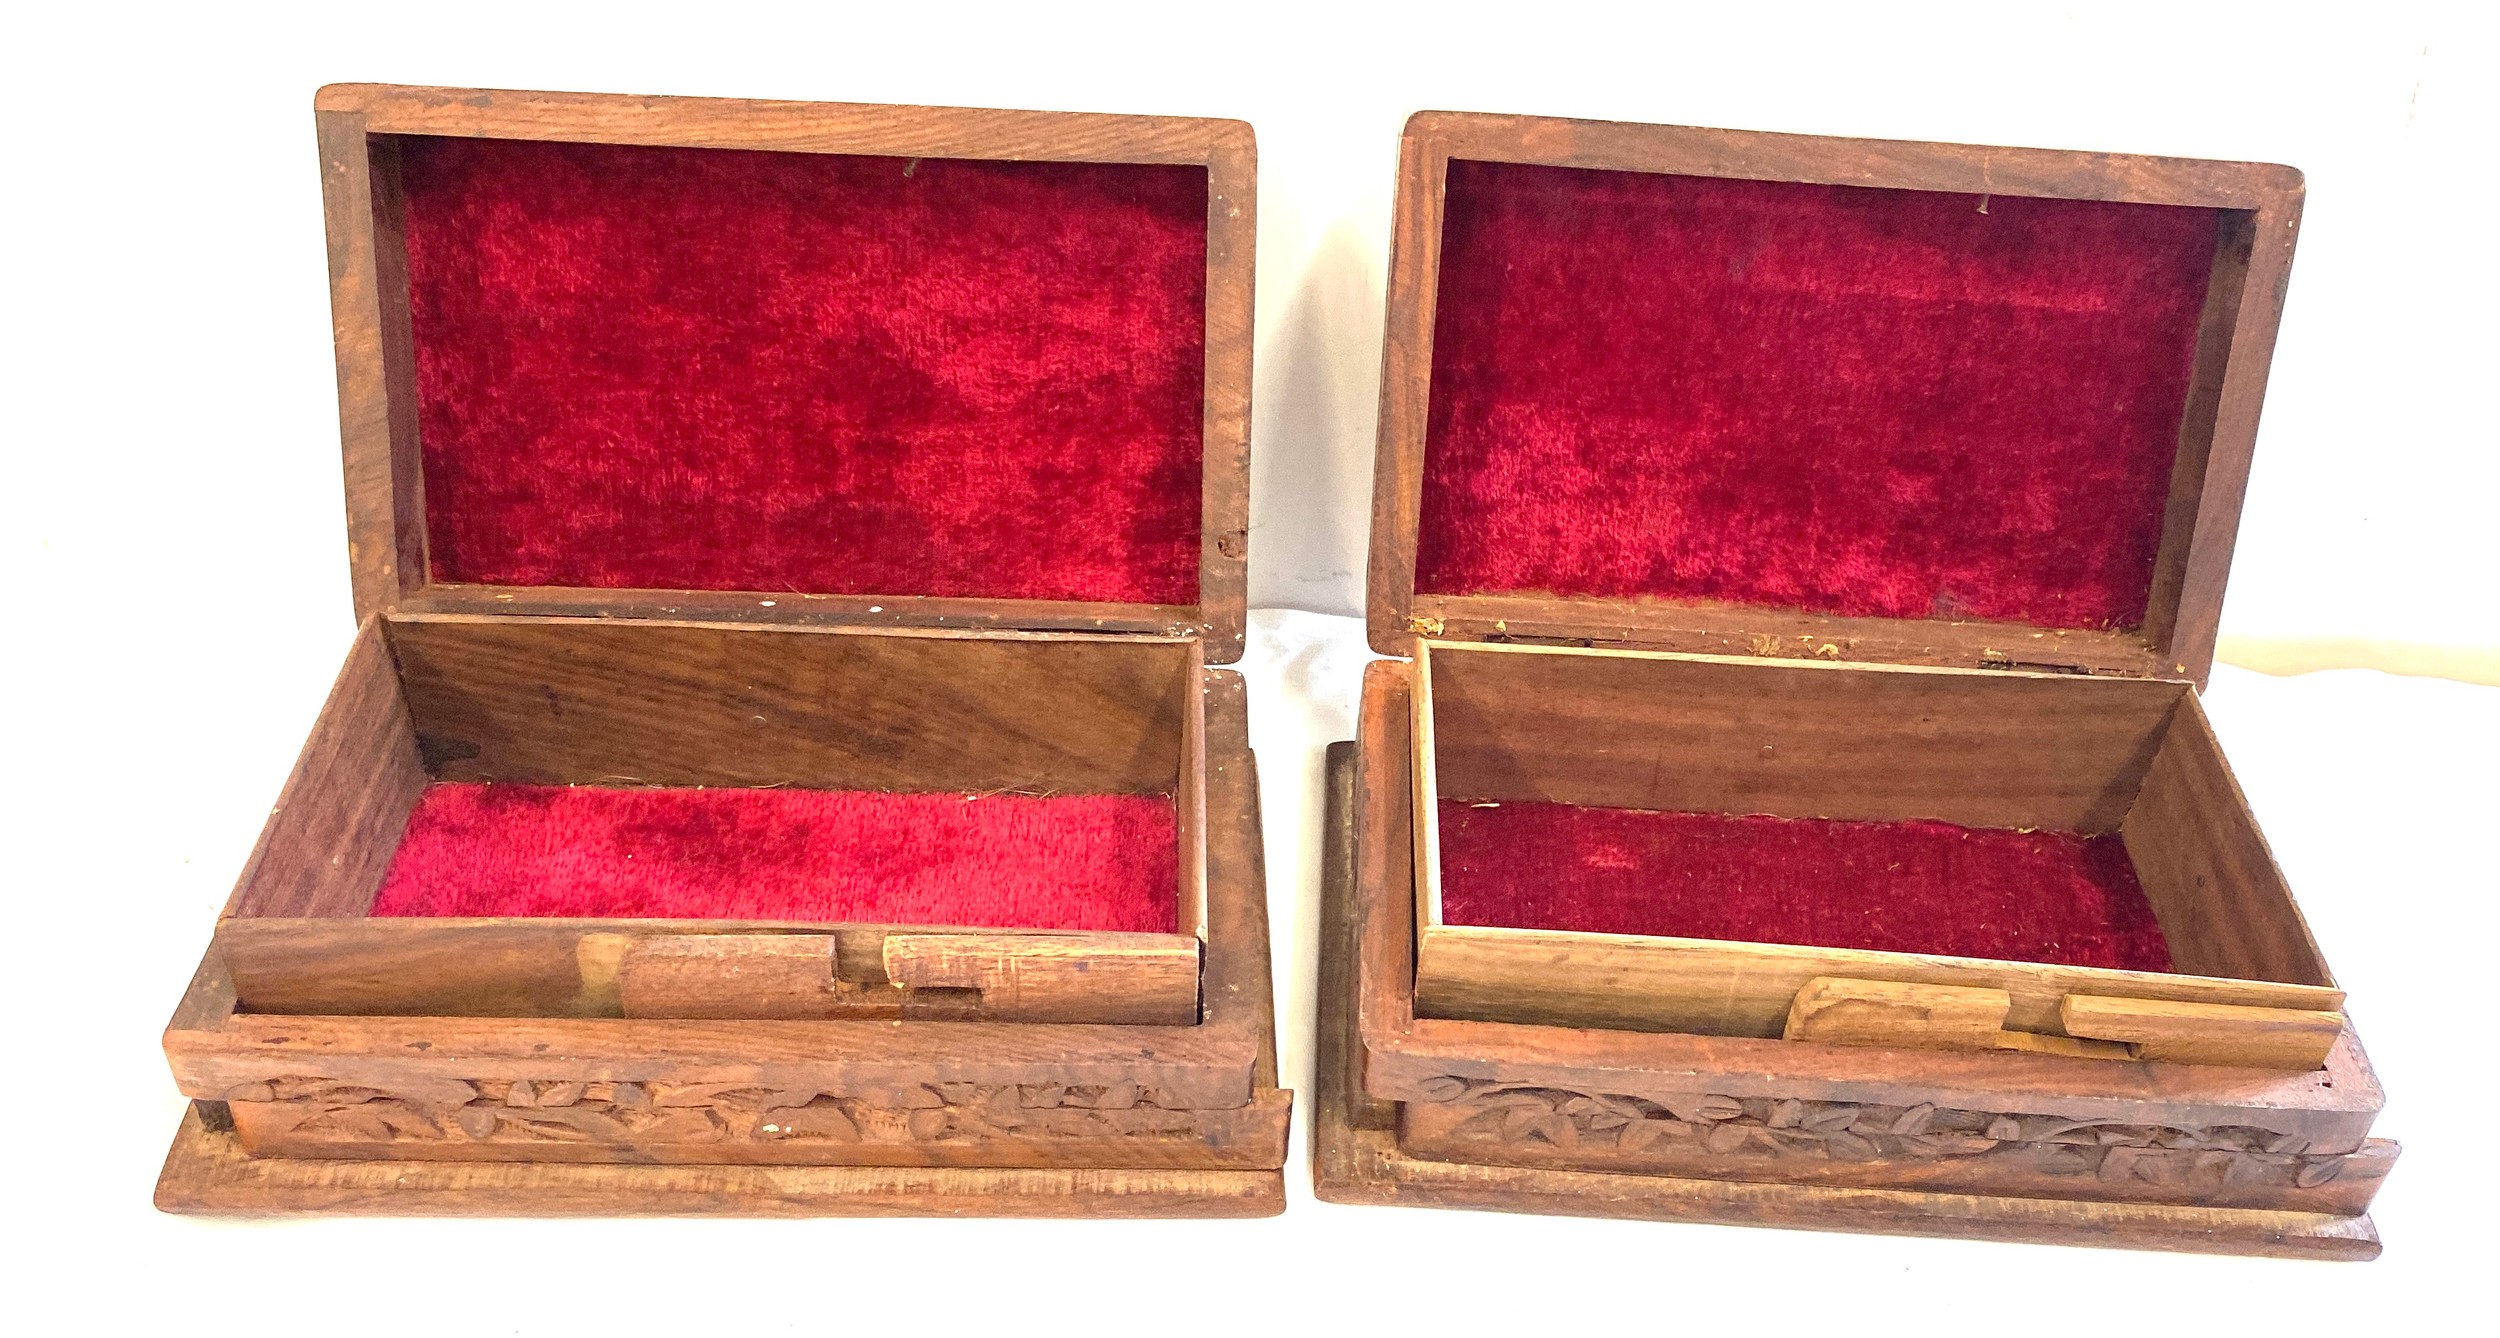 Pair of vintage wooden carved cigarette boxes, each measures approx 3 inches tall 8 inches wide - Image 3 of 5